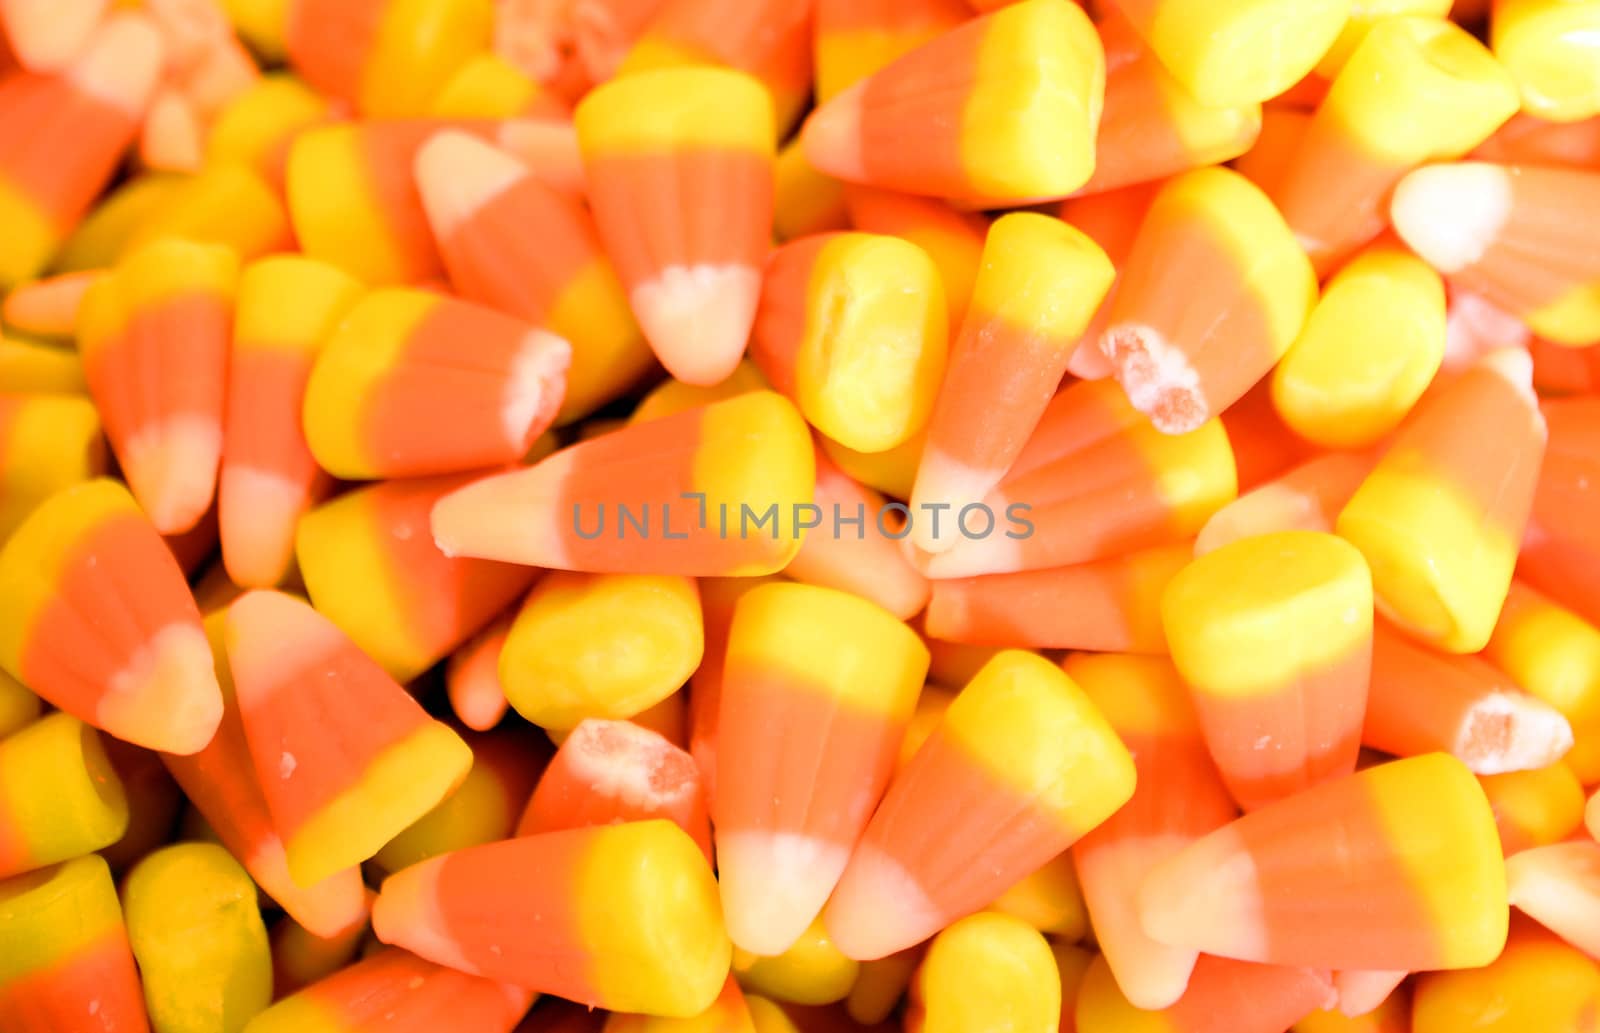 candy corn for halloween by ftlaudgirl